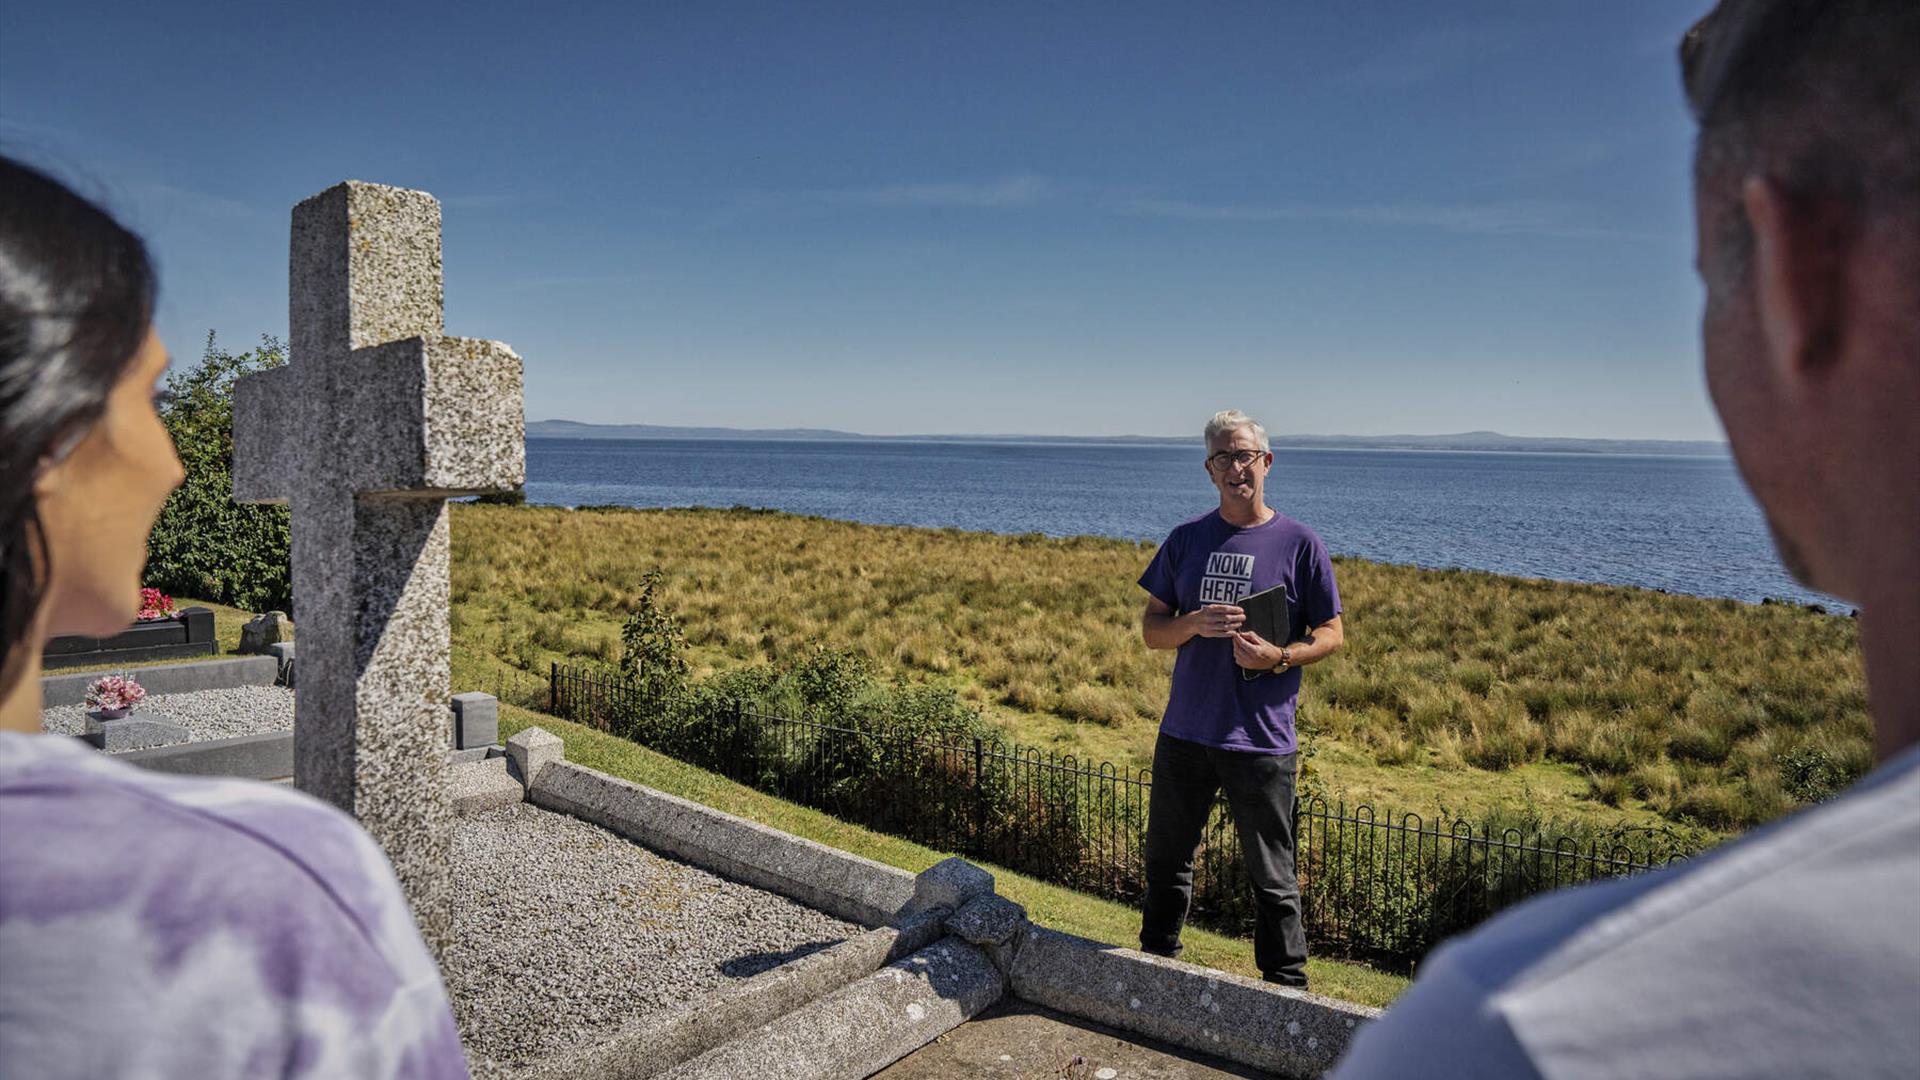 Overlooking beautiful views over Lough Neagh, Jim encourages the group to take time out to reflect